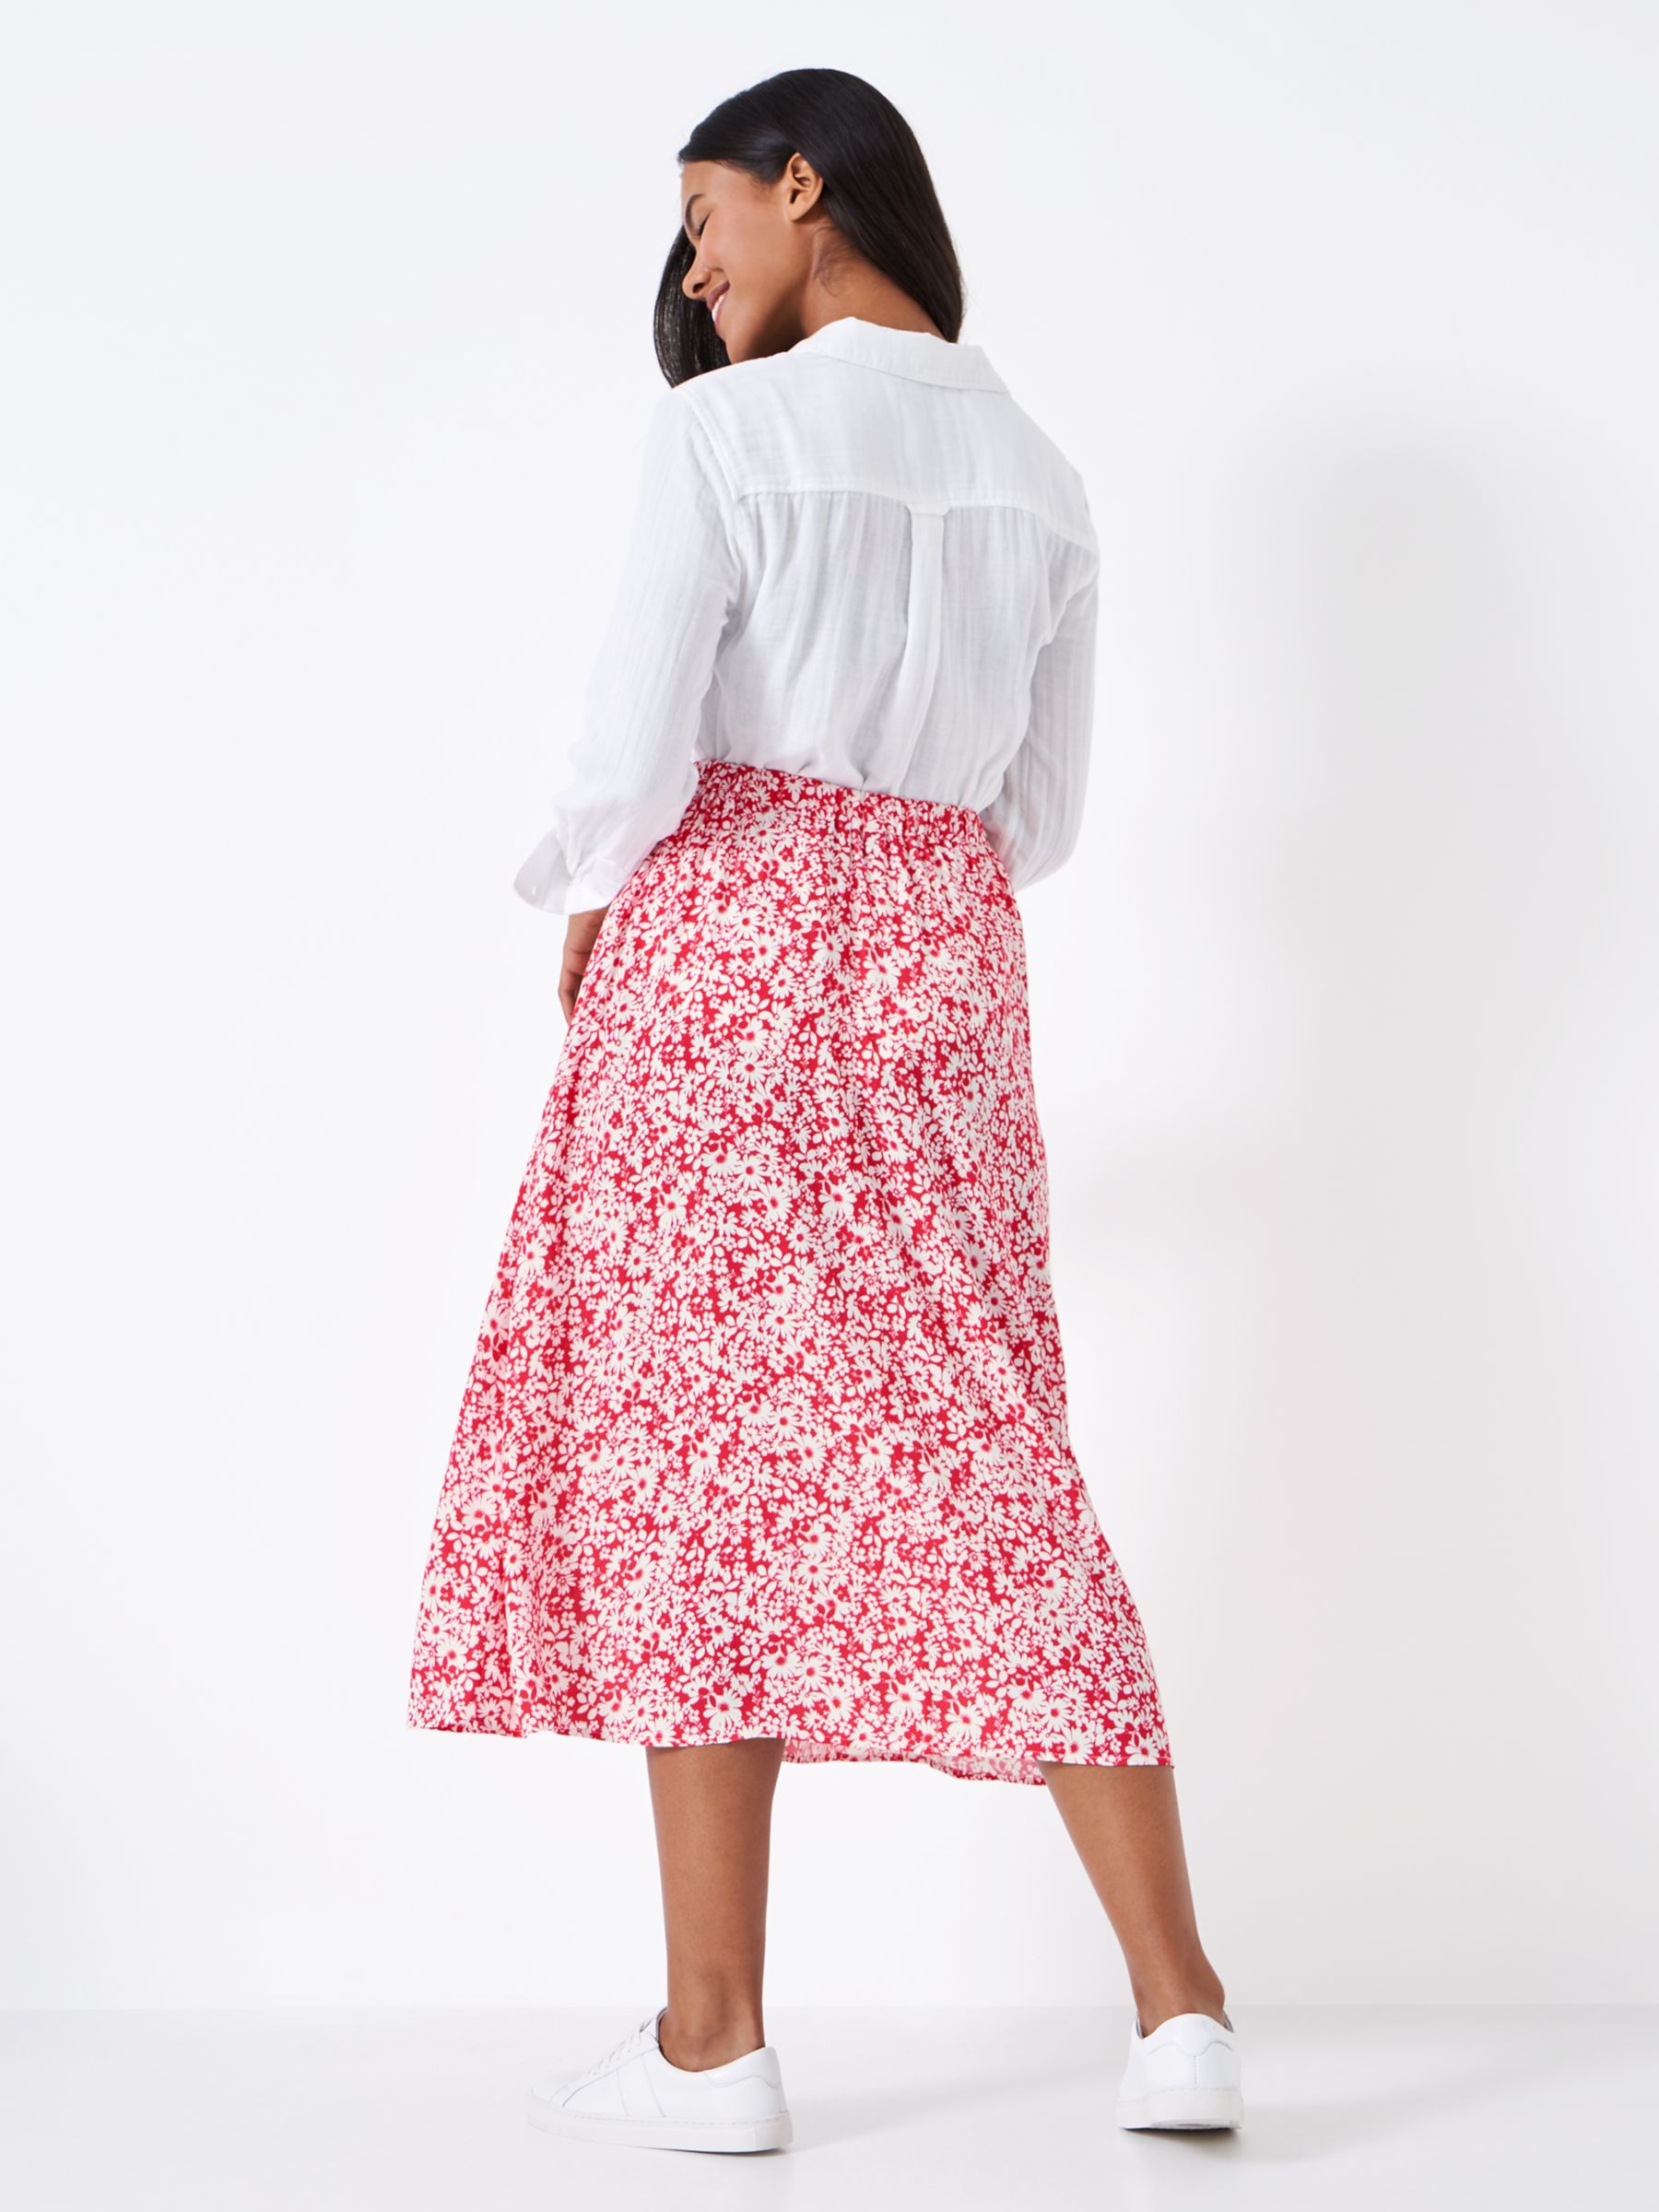 Buy Crew Clothing Amber Floral Skirt, Red Wine Online at johnlewis.com